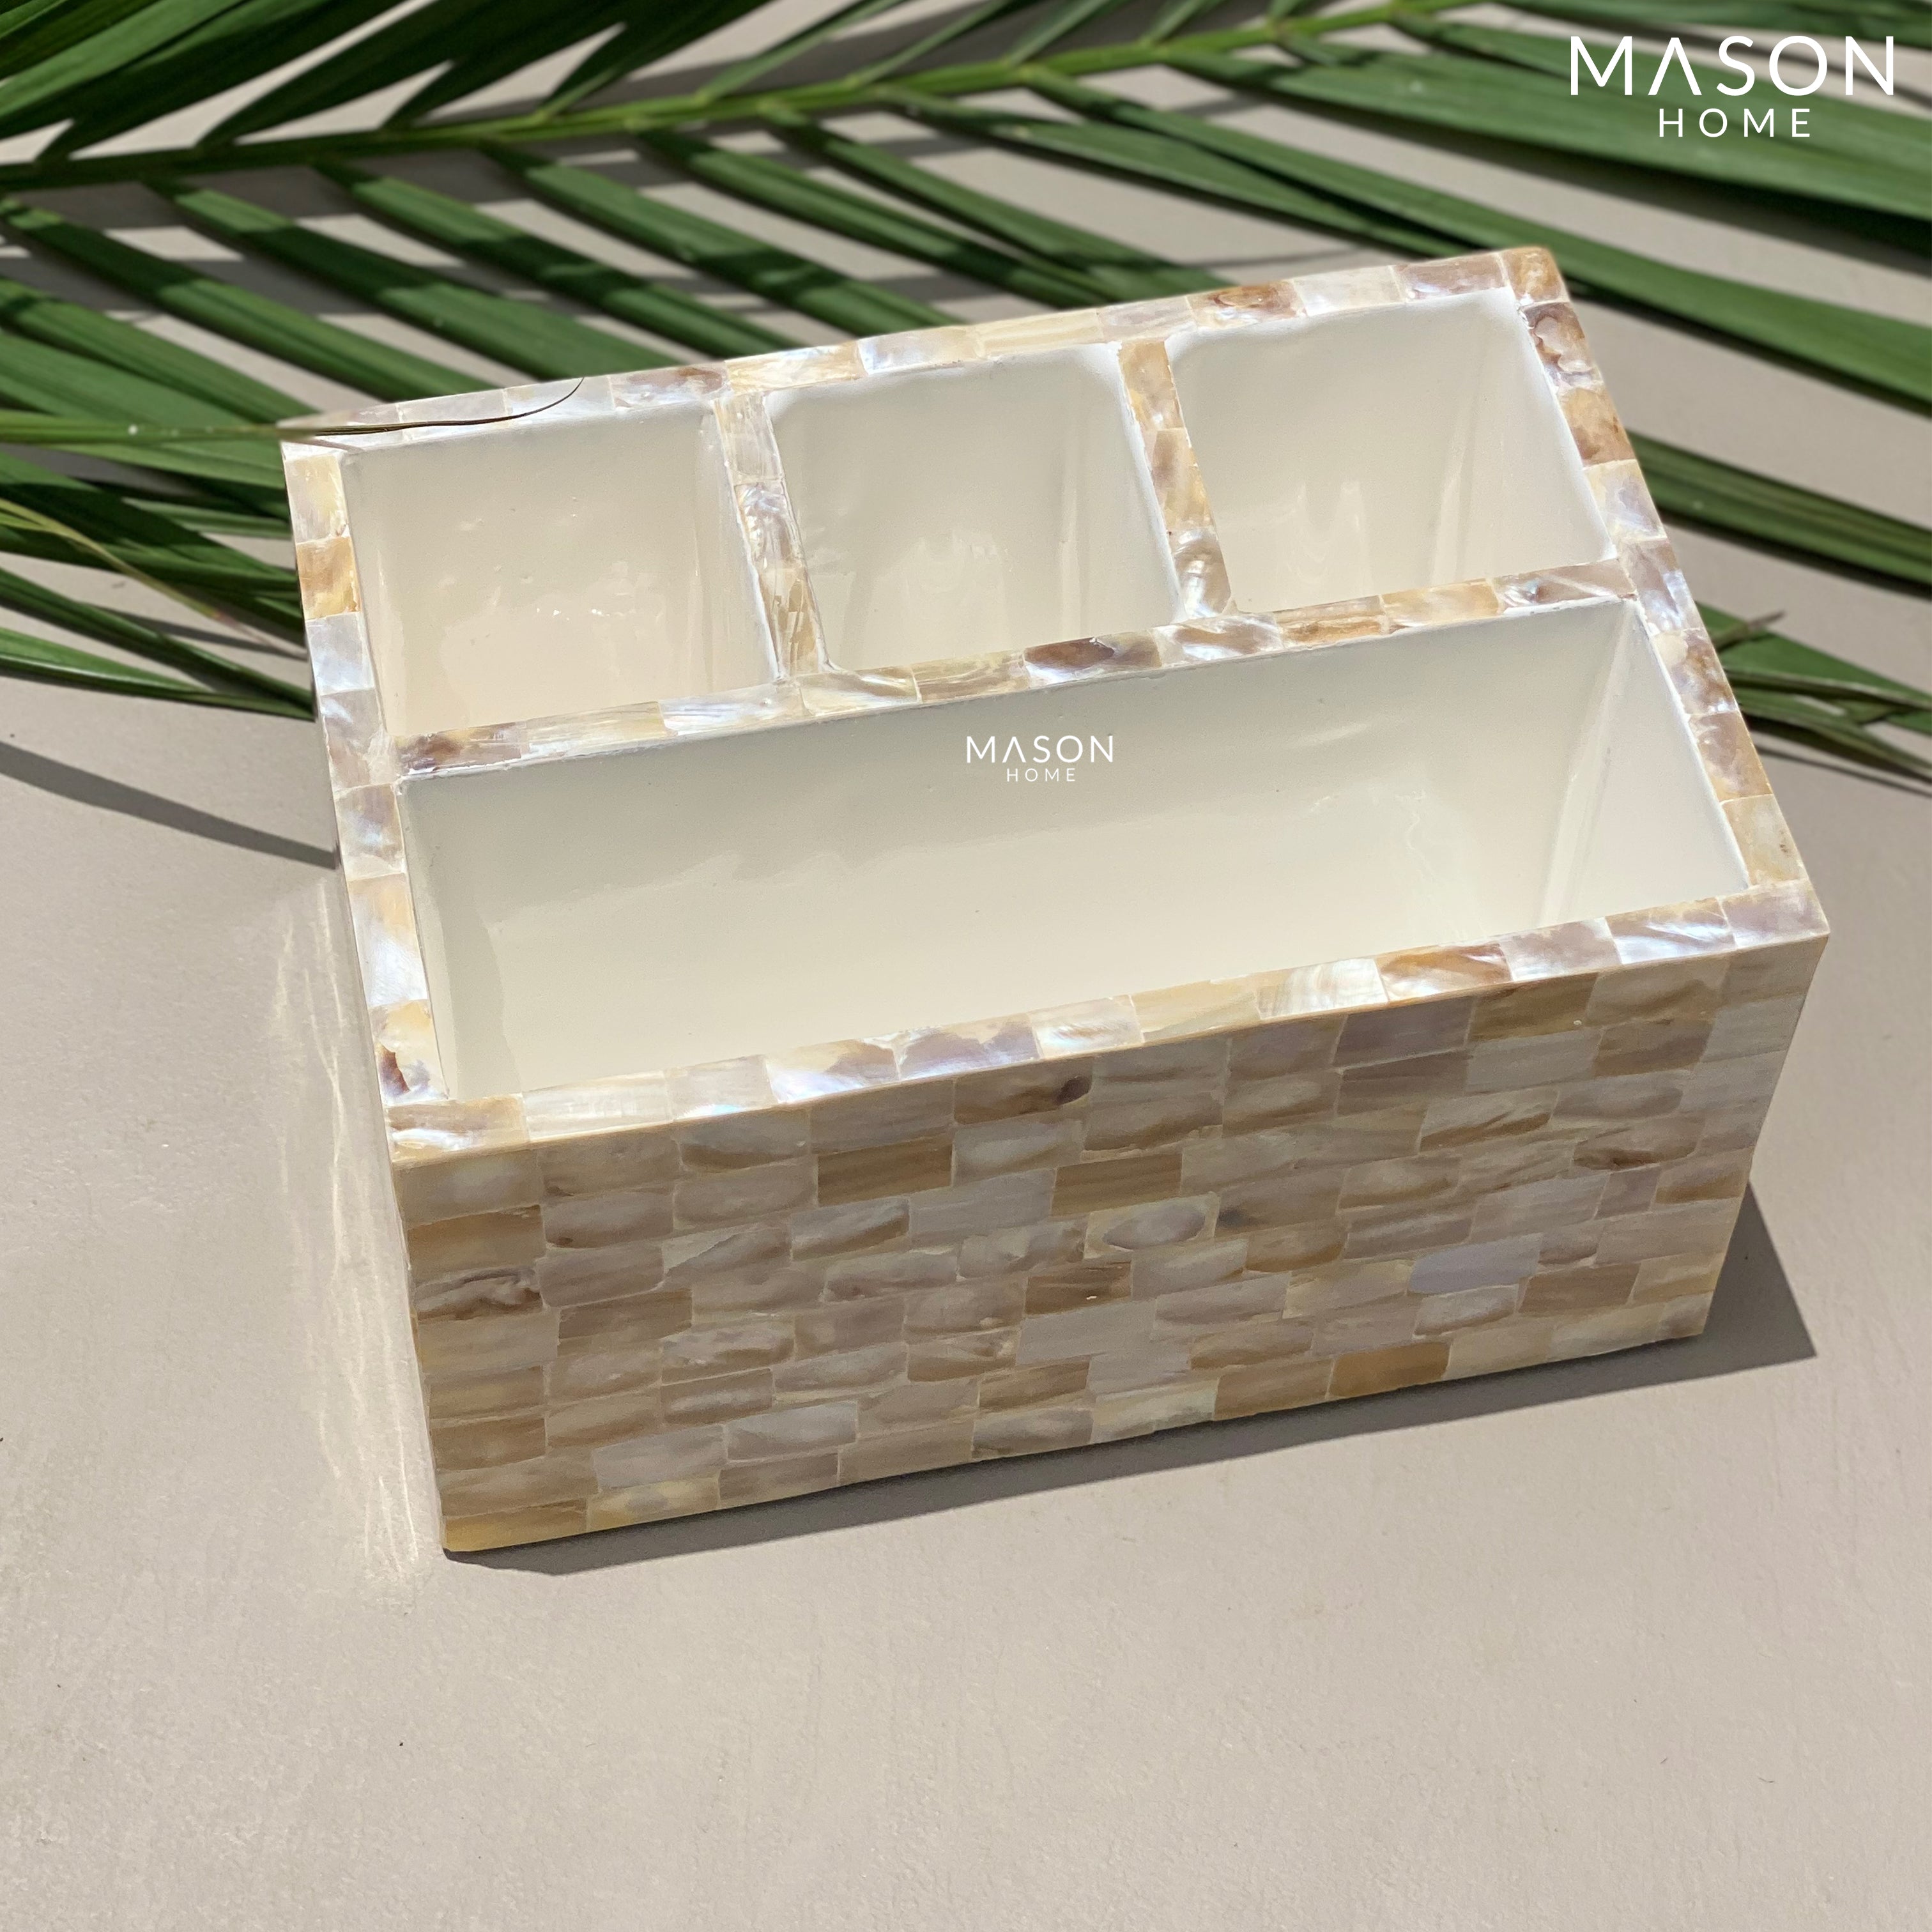 MOTHER OF PEARL CUTLERY HOLDER - Mason Home by Amarsons - Lifestyle &amp; Decor